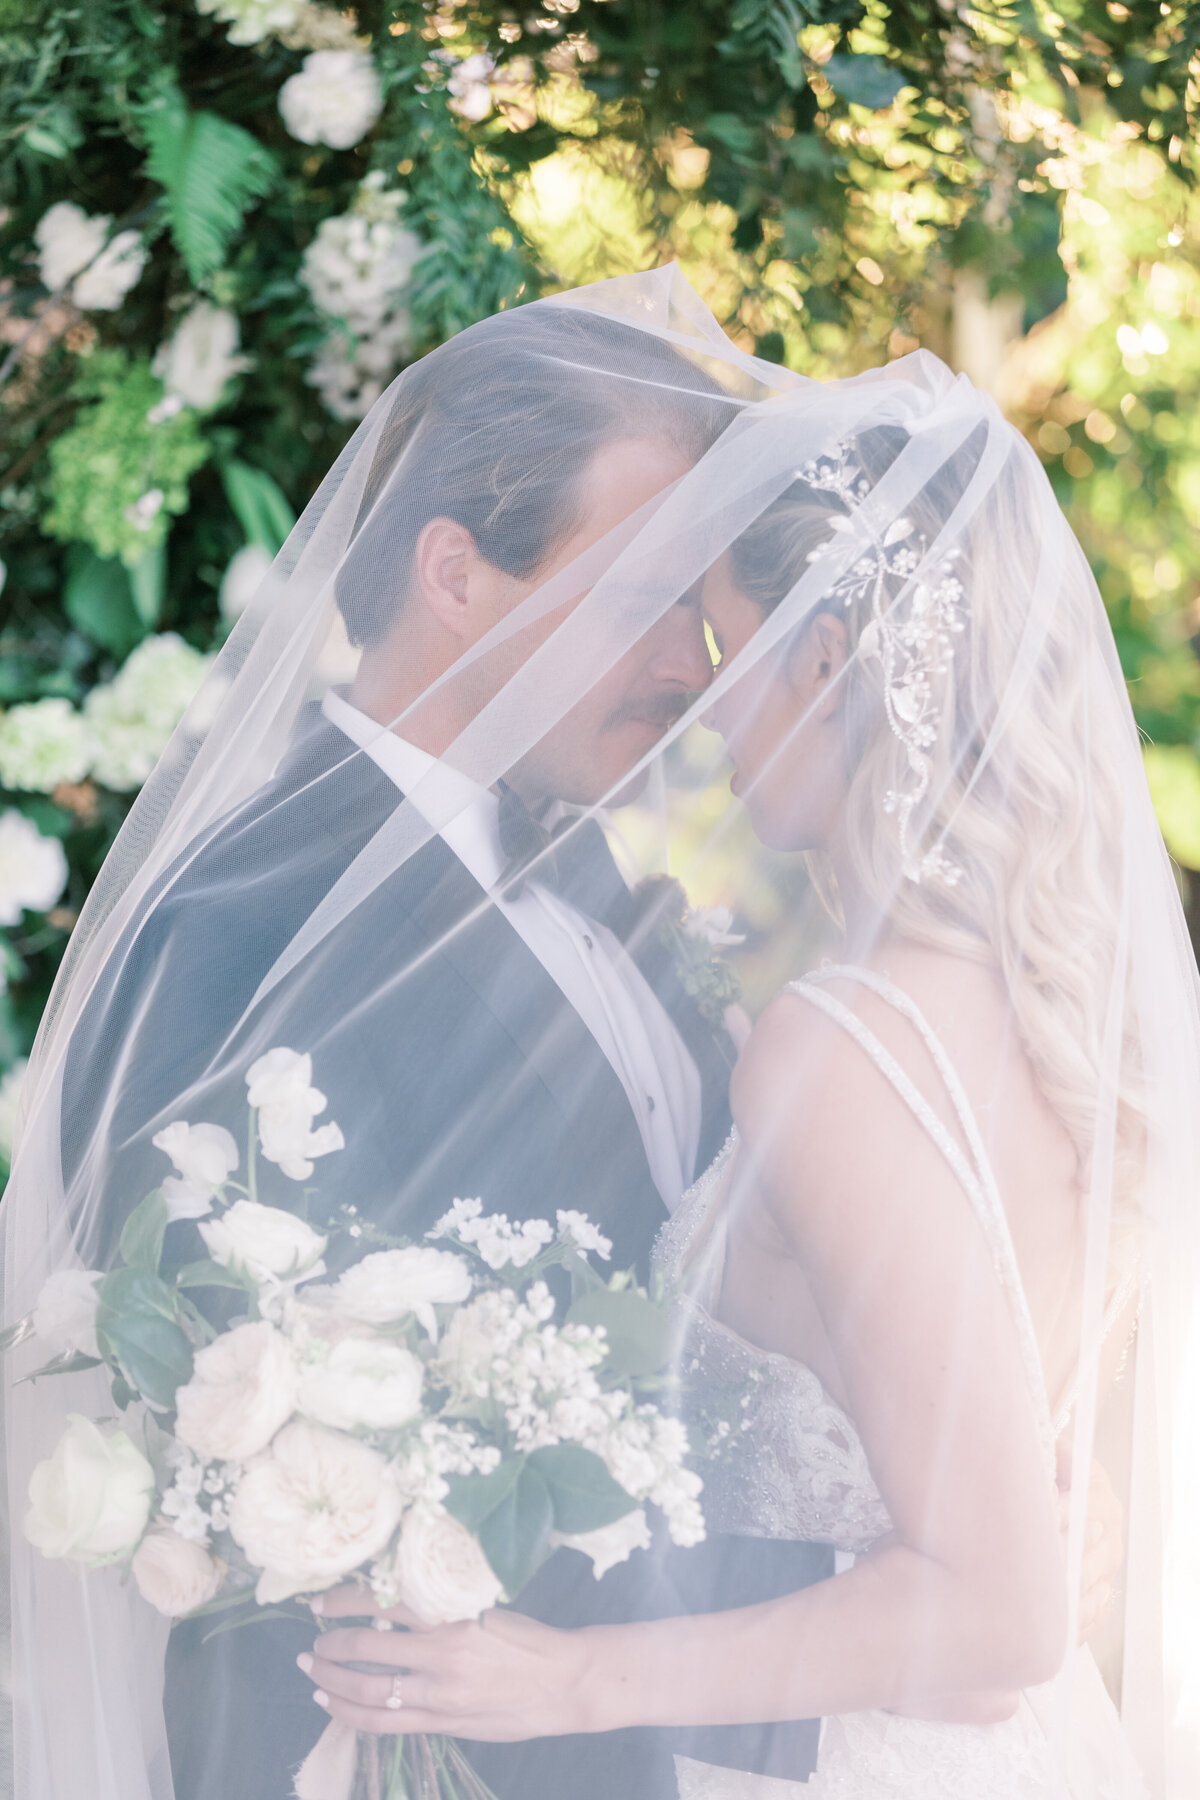 Jocelyn and Spencer Photography California Santa Barbara Wedding Engagement Luxury High End Romantic Imagery Light Airy Fineart Film Style15